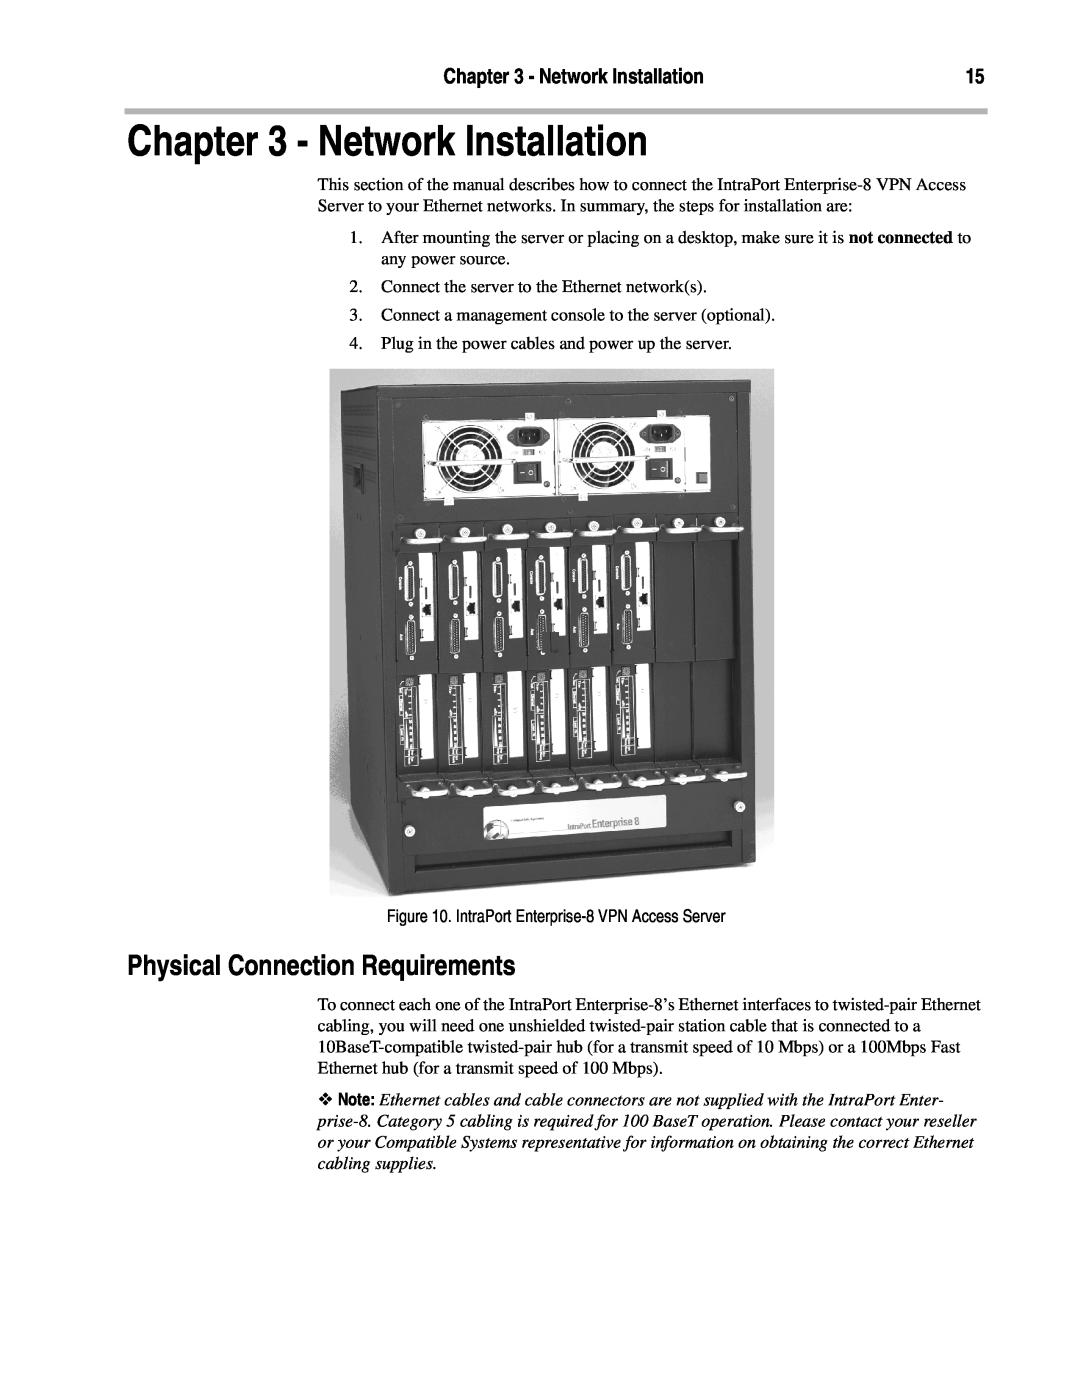 Compatible Systems Enterprise-8, A00-1869 manual Network Installation, Physical Connection Requirements 